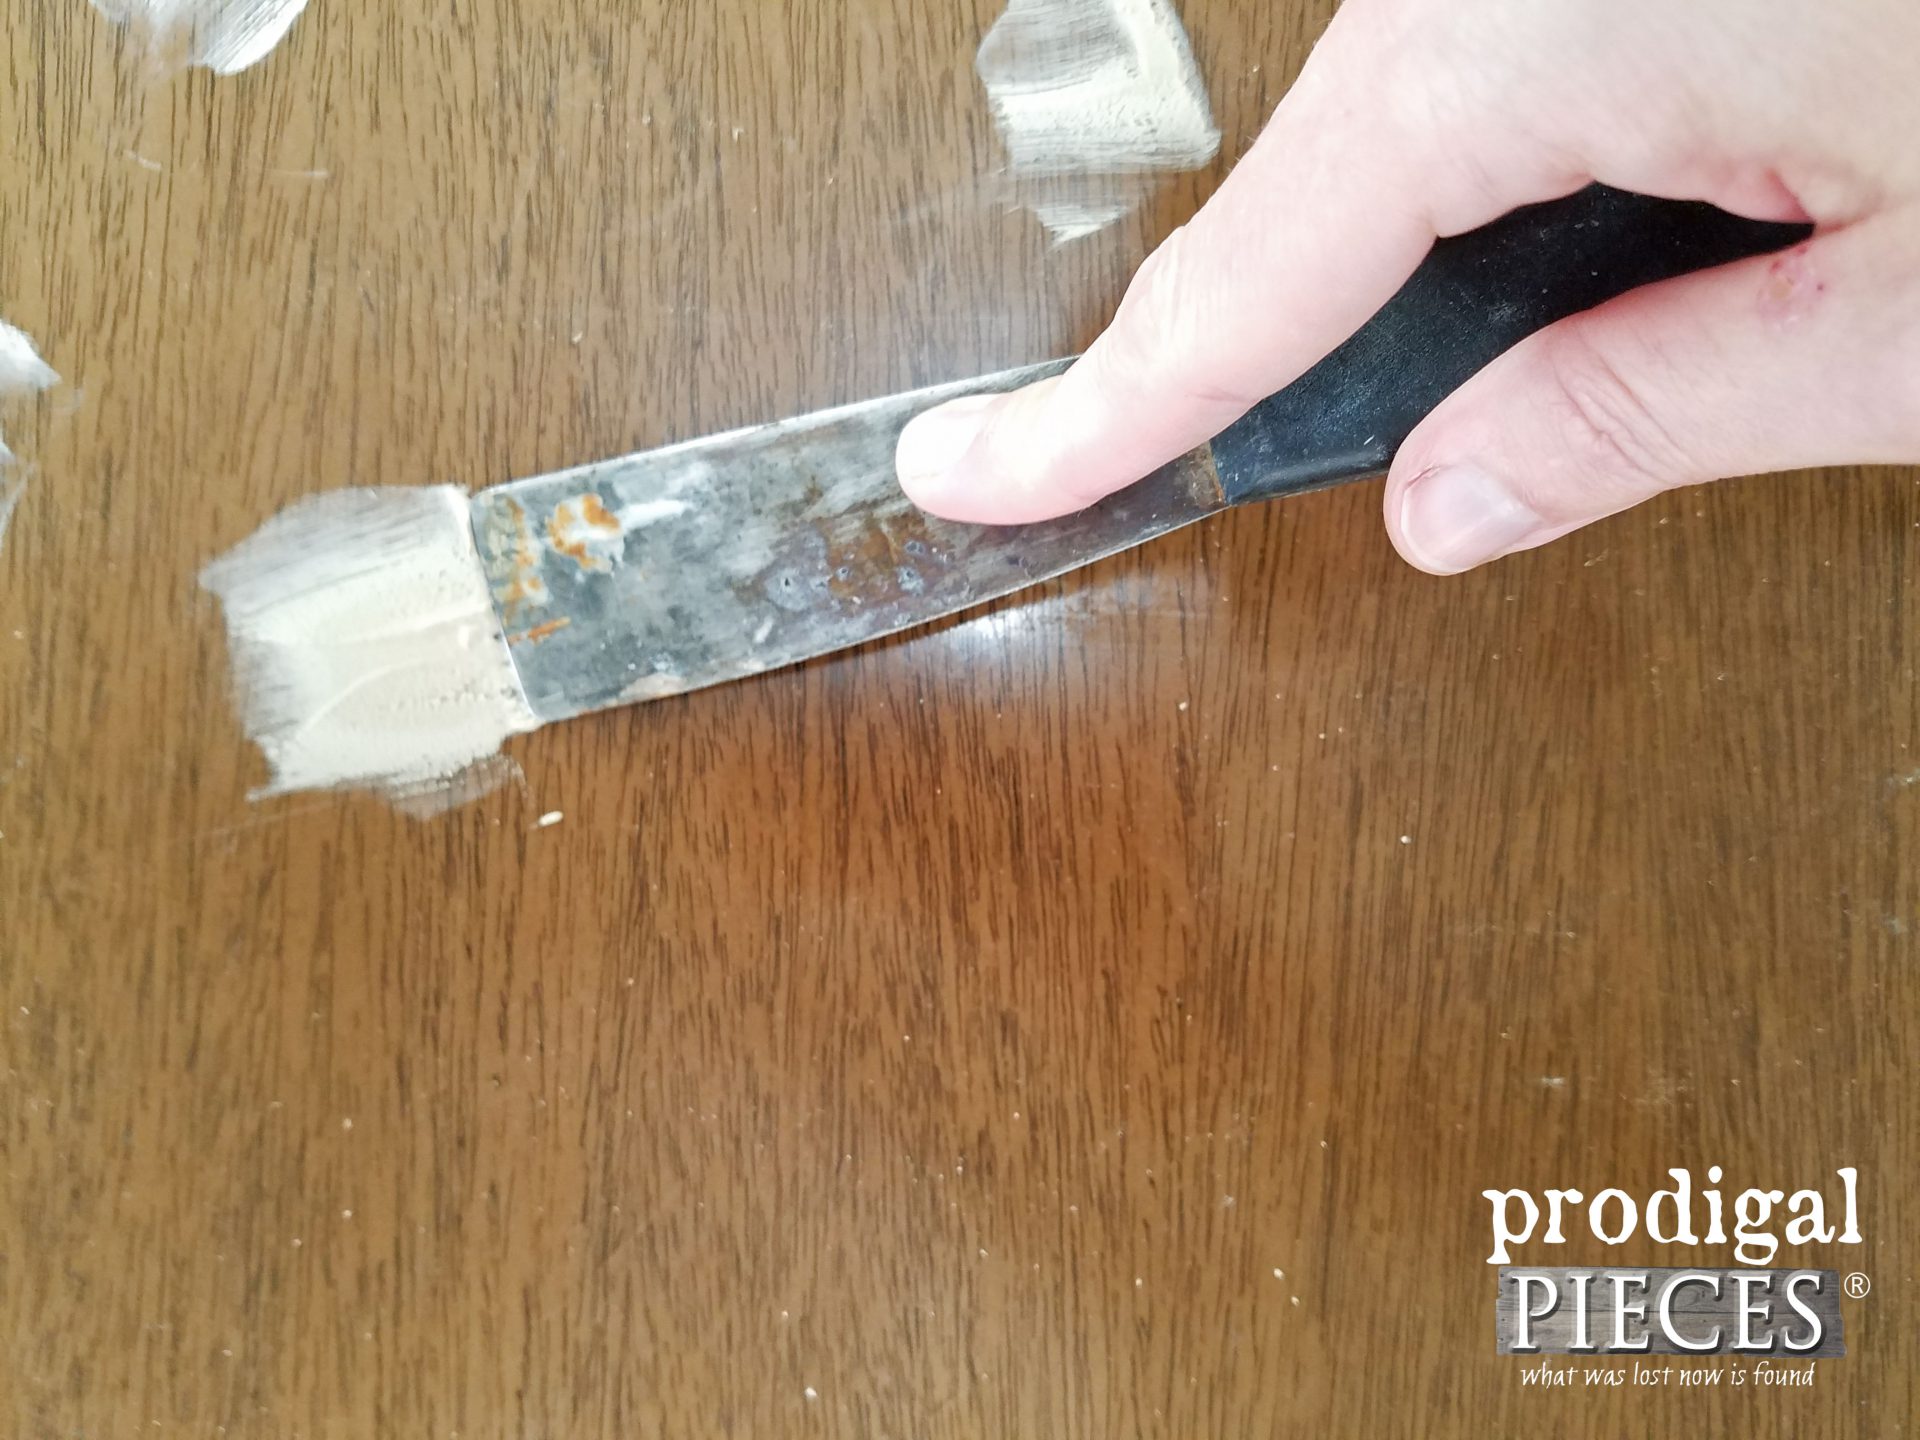 Repairing Damage to Dresser | How to Paint Furniture | prodigalpieces.com